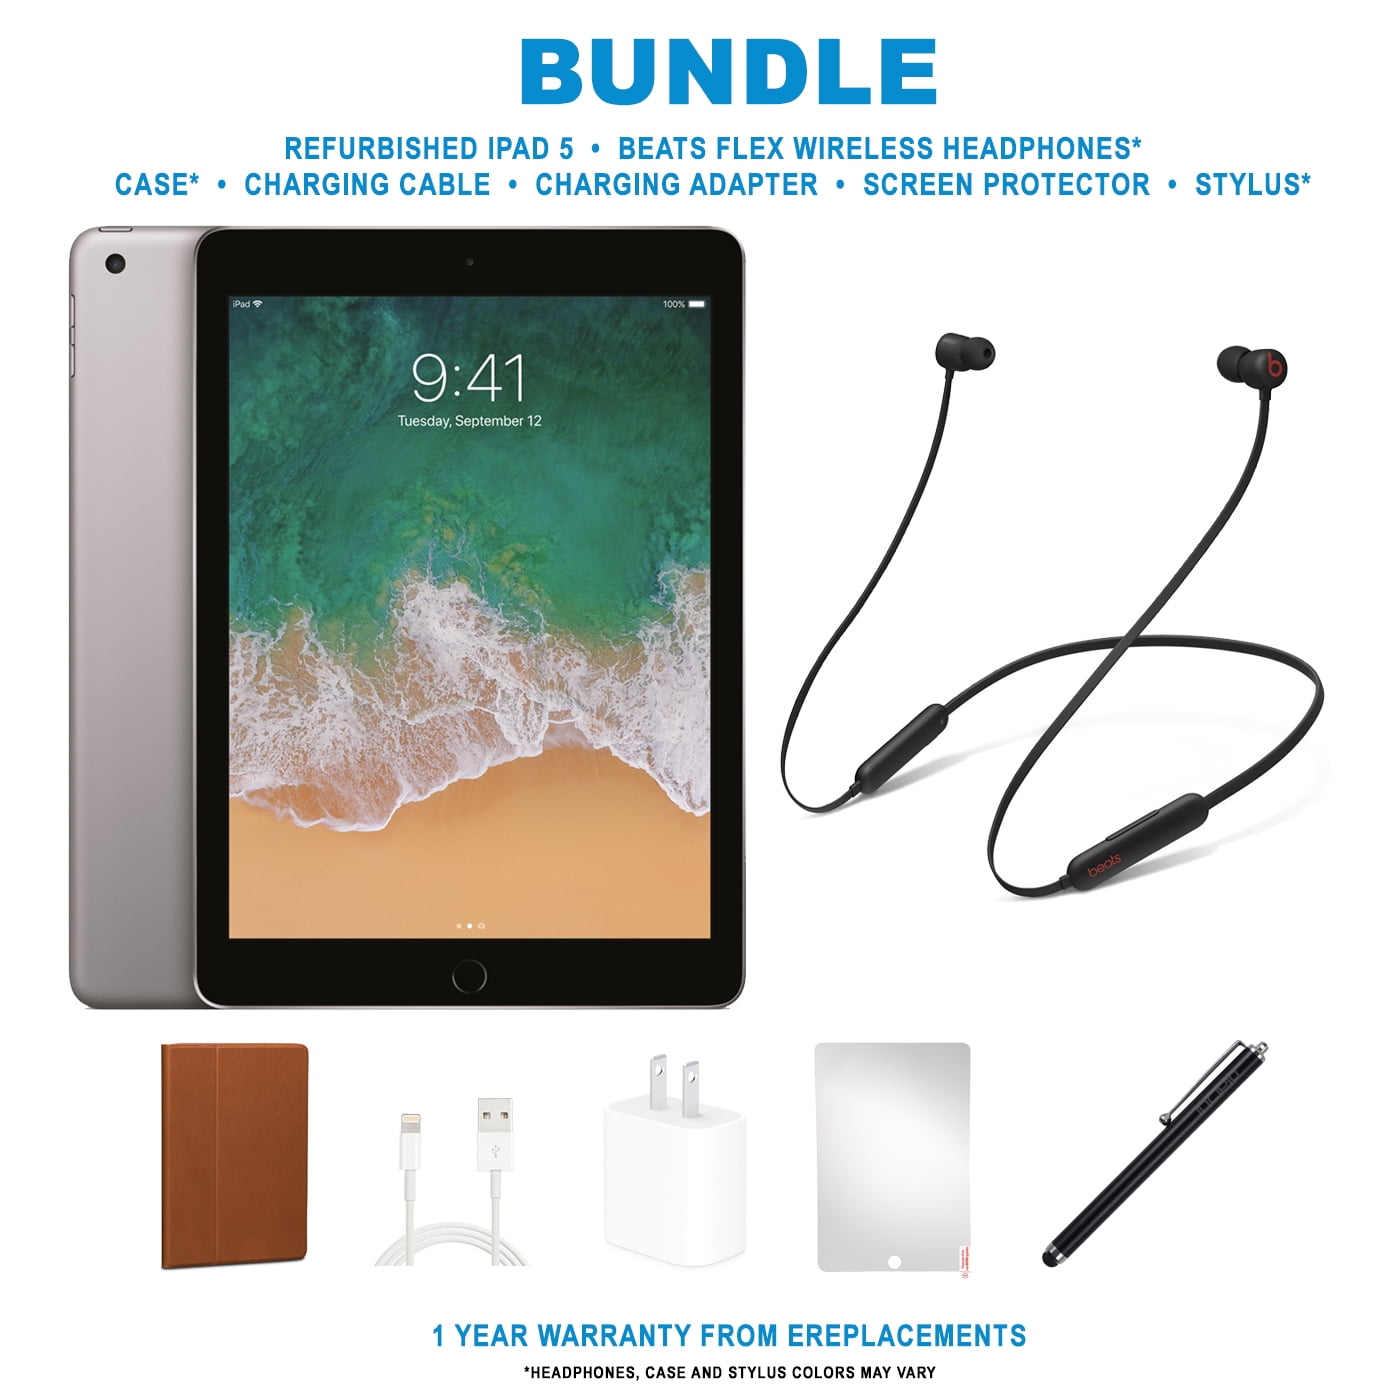 Restored Apple iPad 5 (2017) Bundle, 32GB, Space Gray, Wi-Fi Only, Beats or  JBL, Case, Tempered Glass, Stylus Pen, Charging Accessories. (Refurbished)